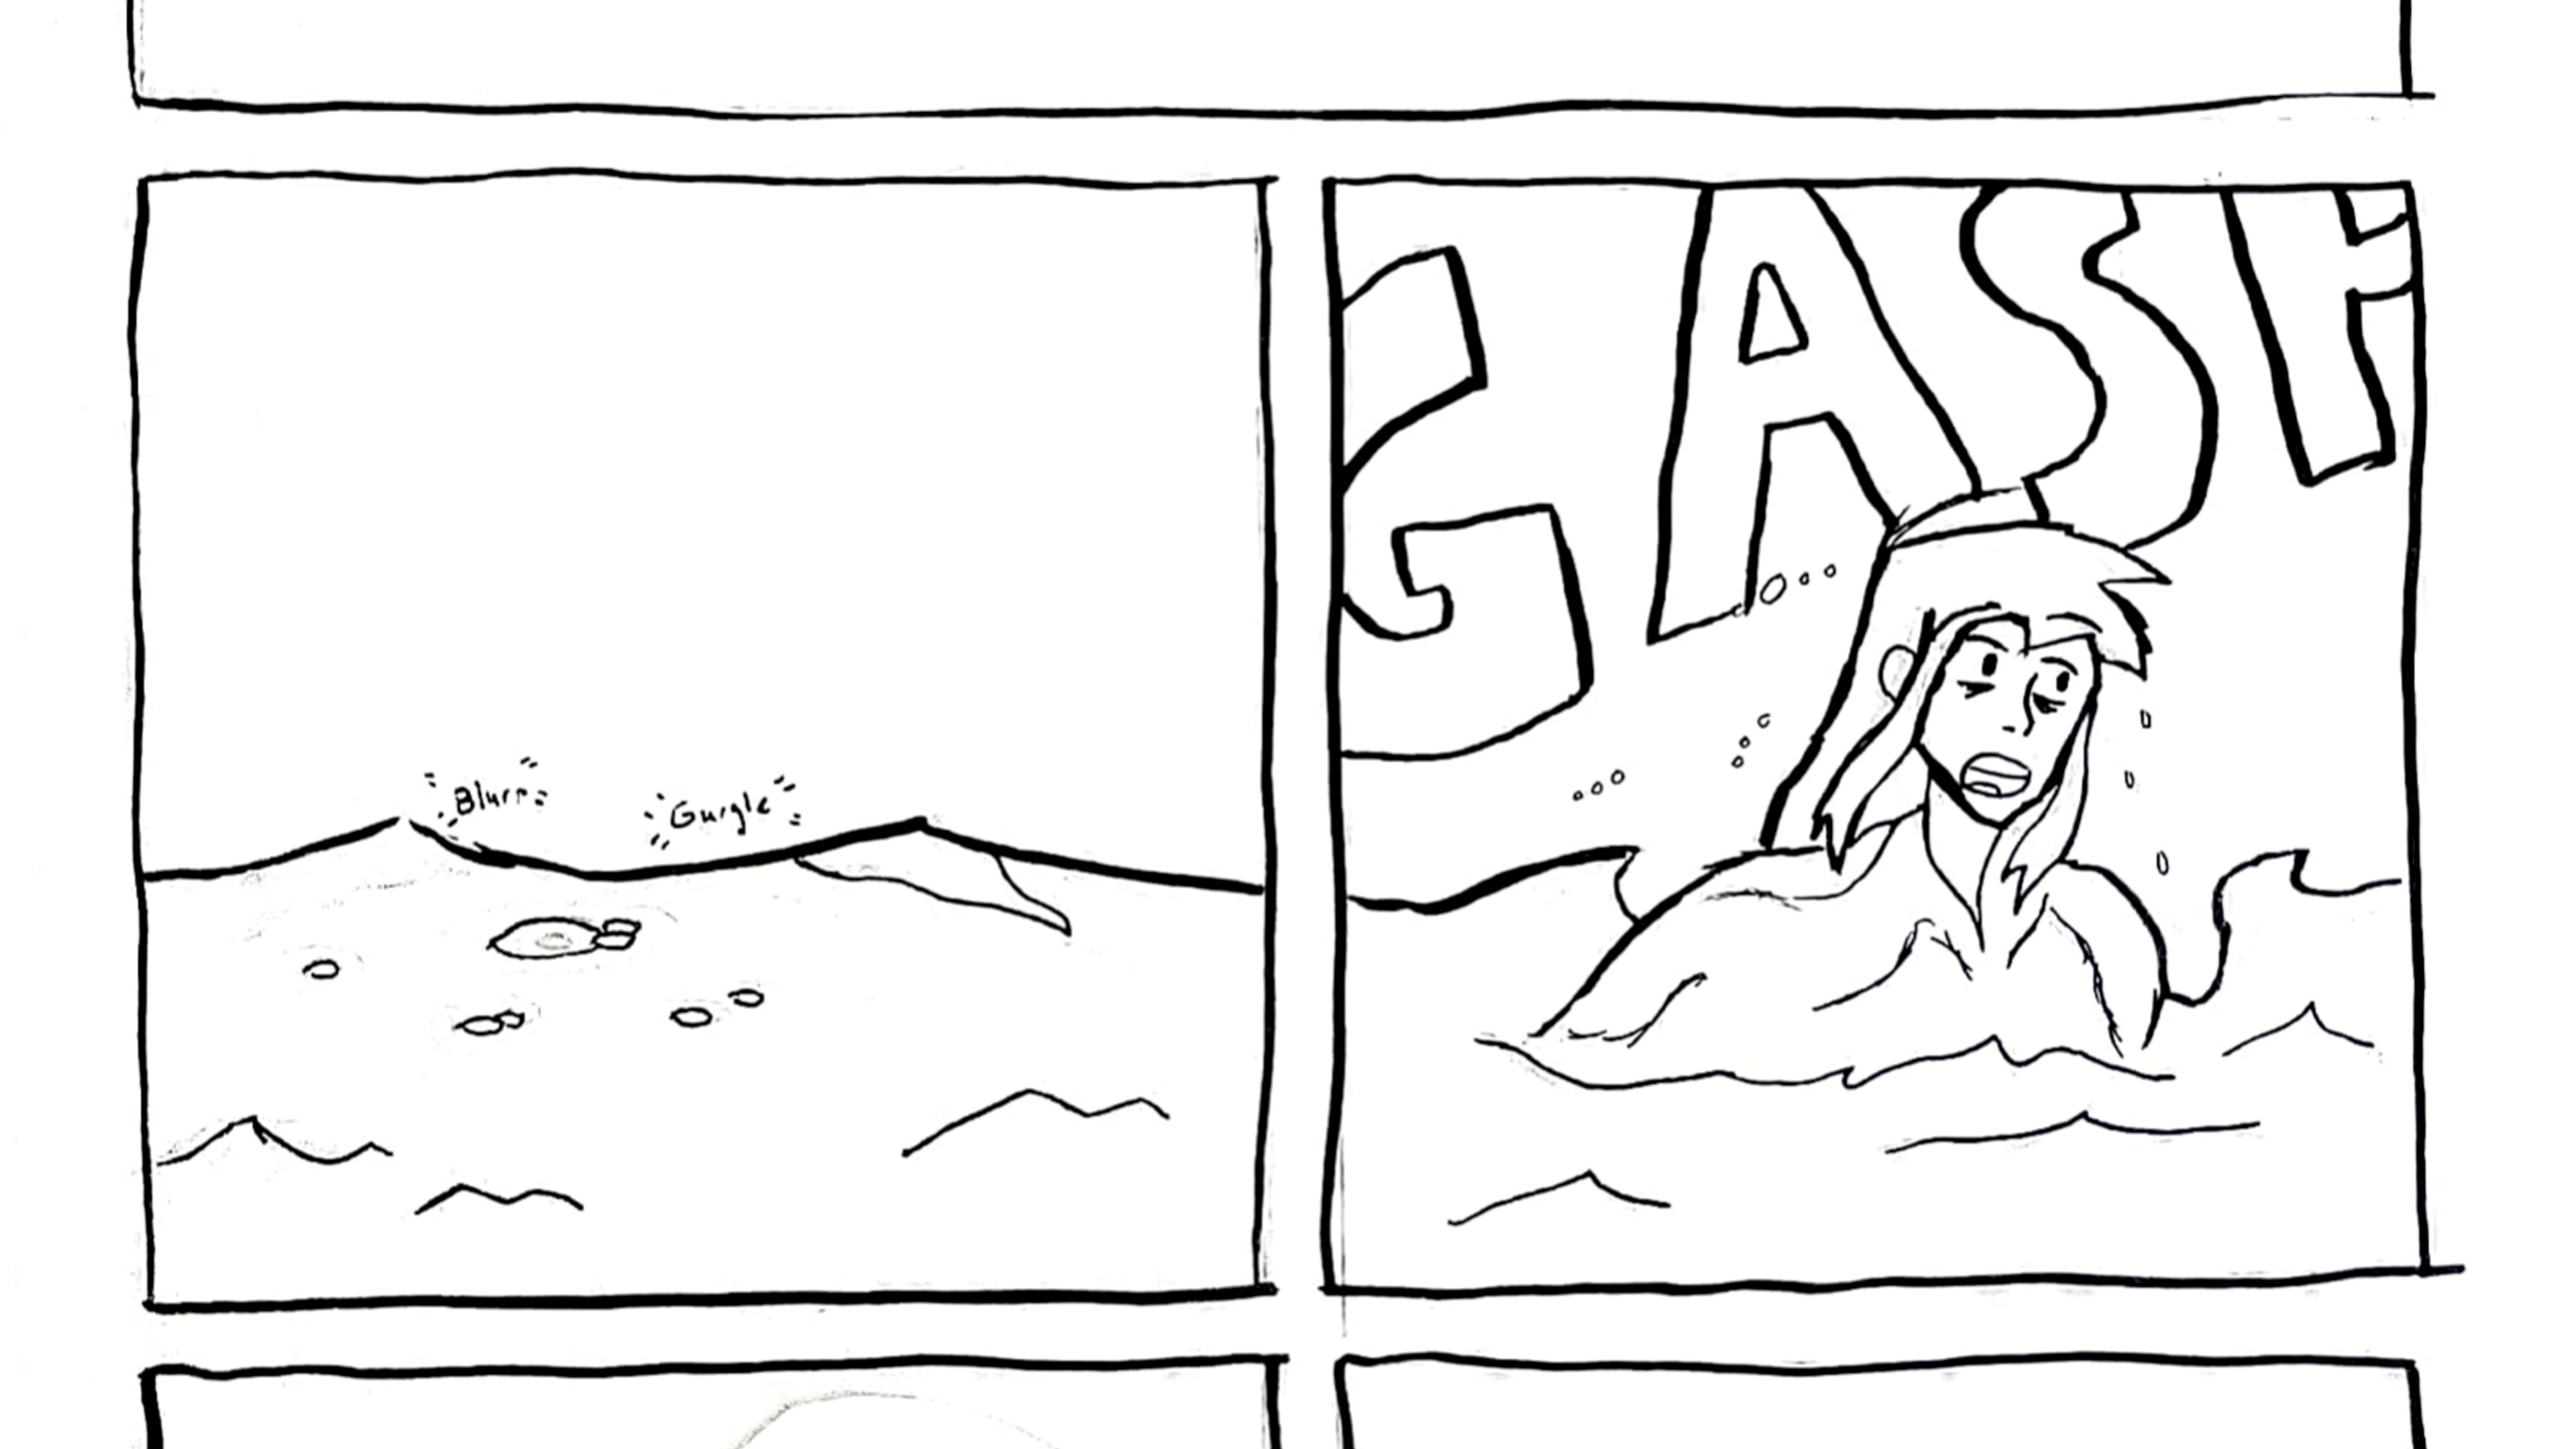 2 panels of first page of Colors Zine. Black and white drawing of somebody surfacing in a body of water